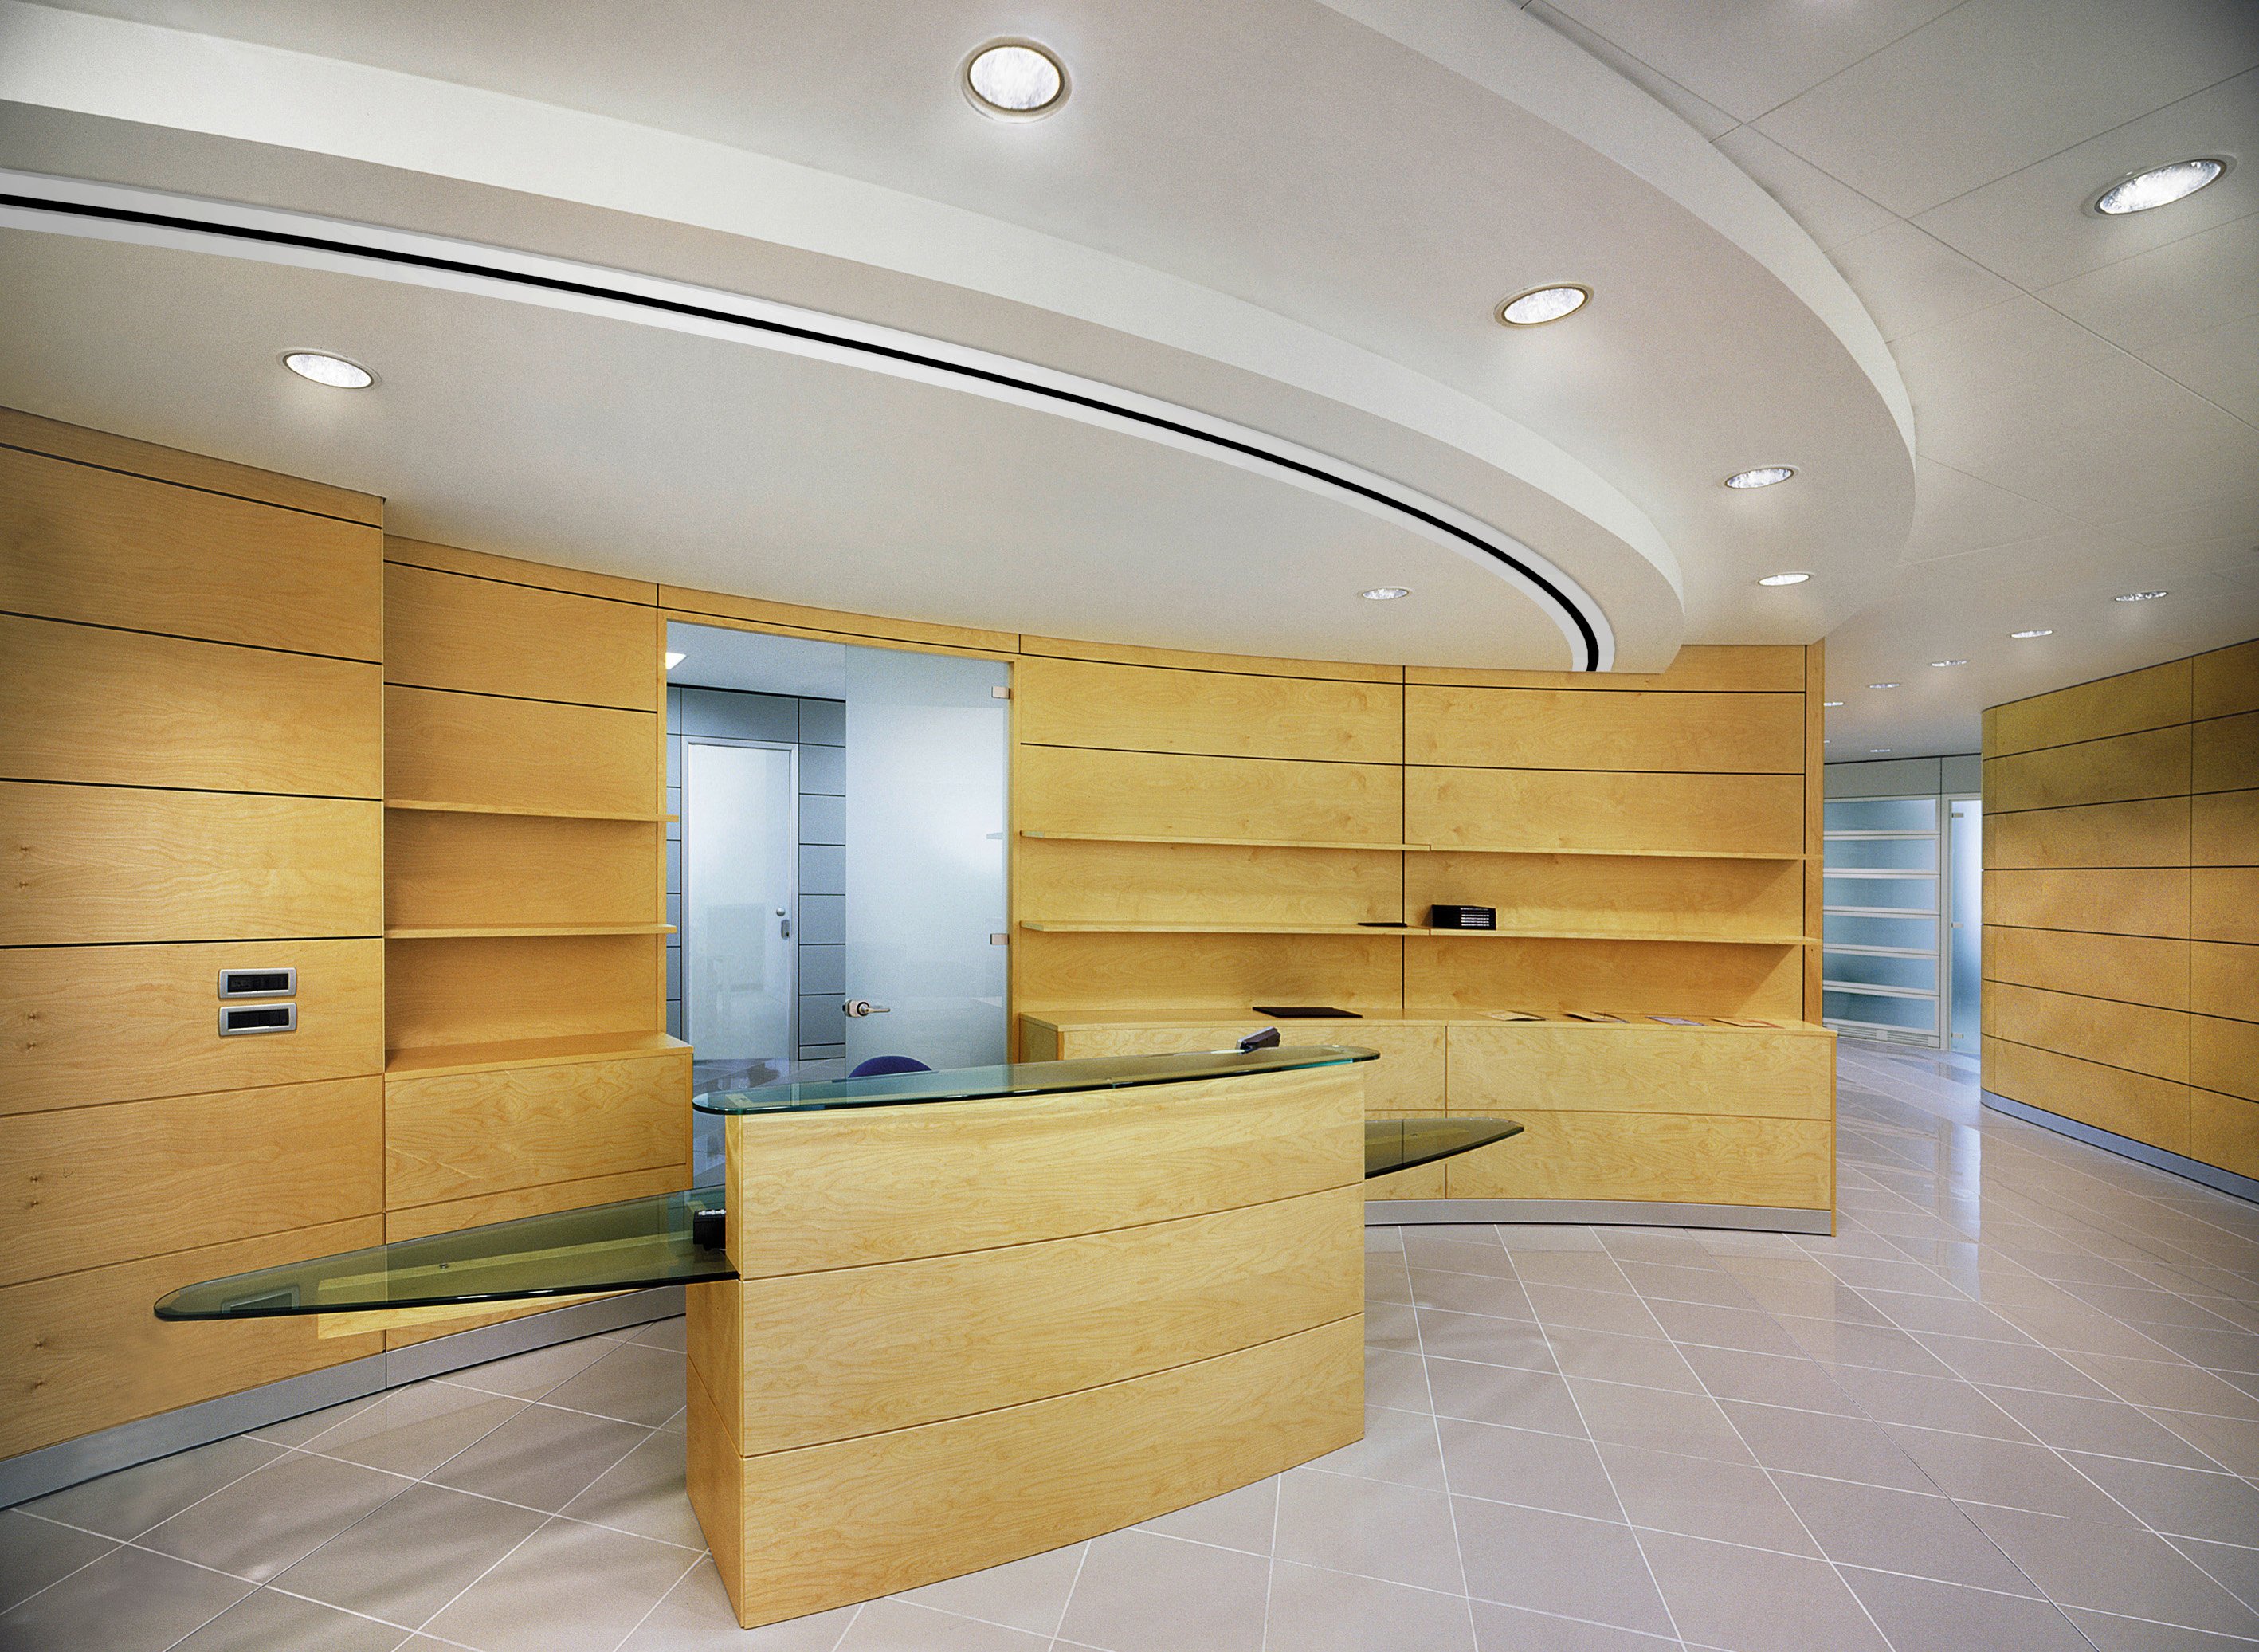 CF Custom Flow slot diffuser with an EF exposed-frame border installed in the bulkhead above a reception desk